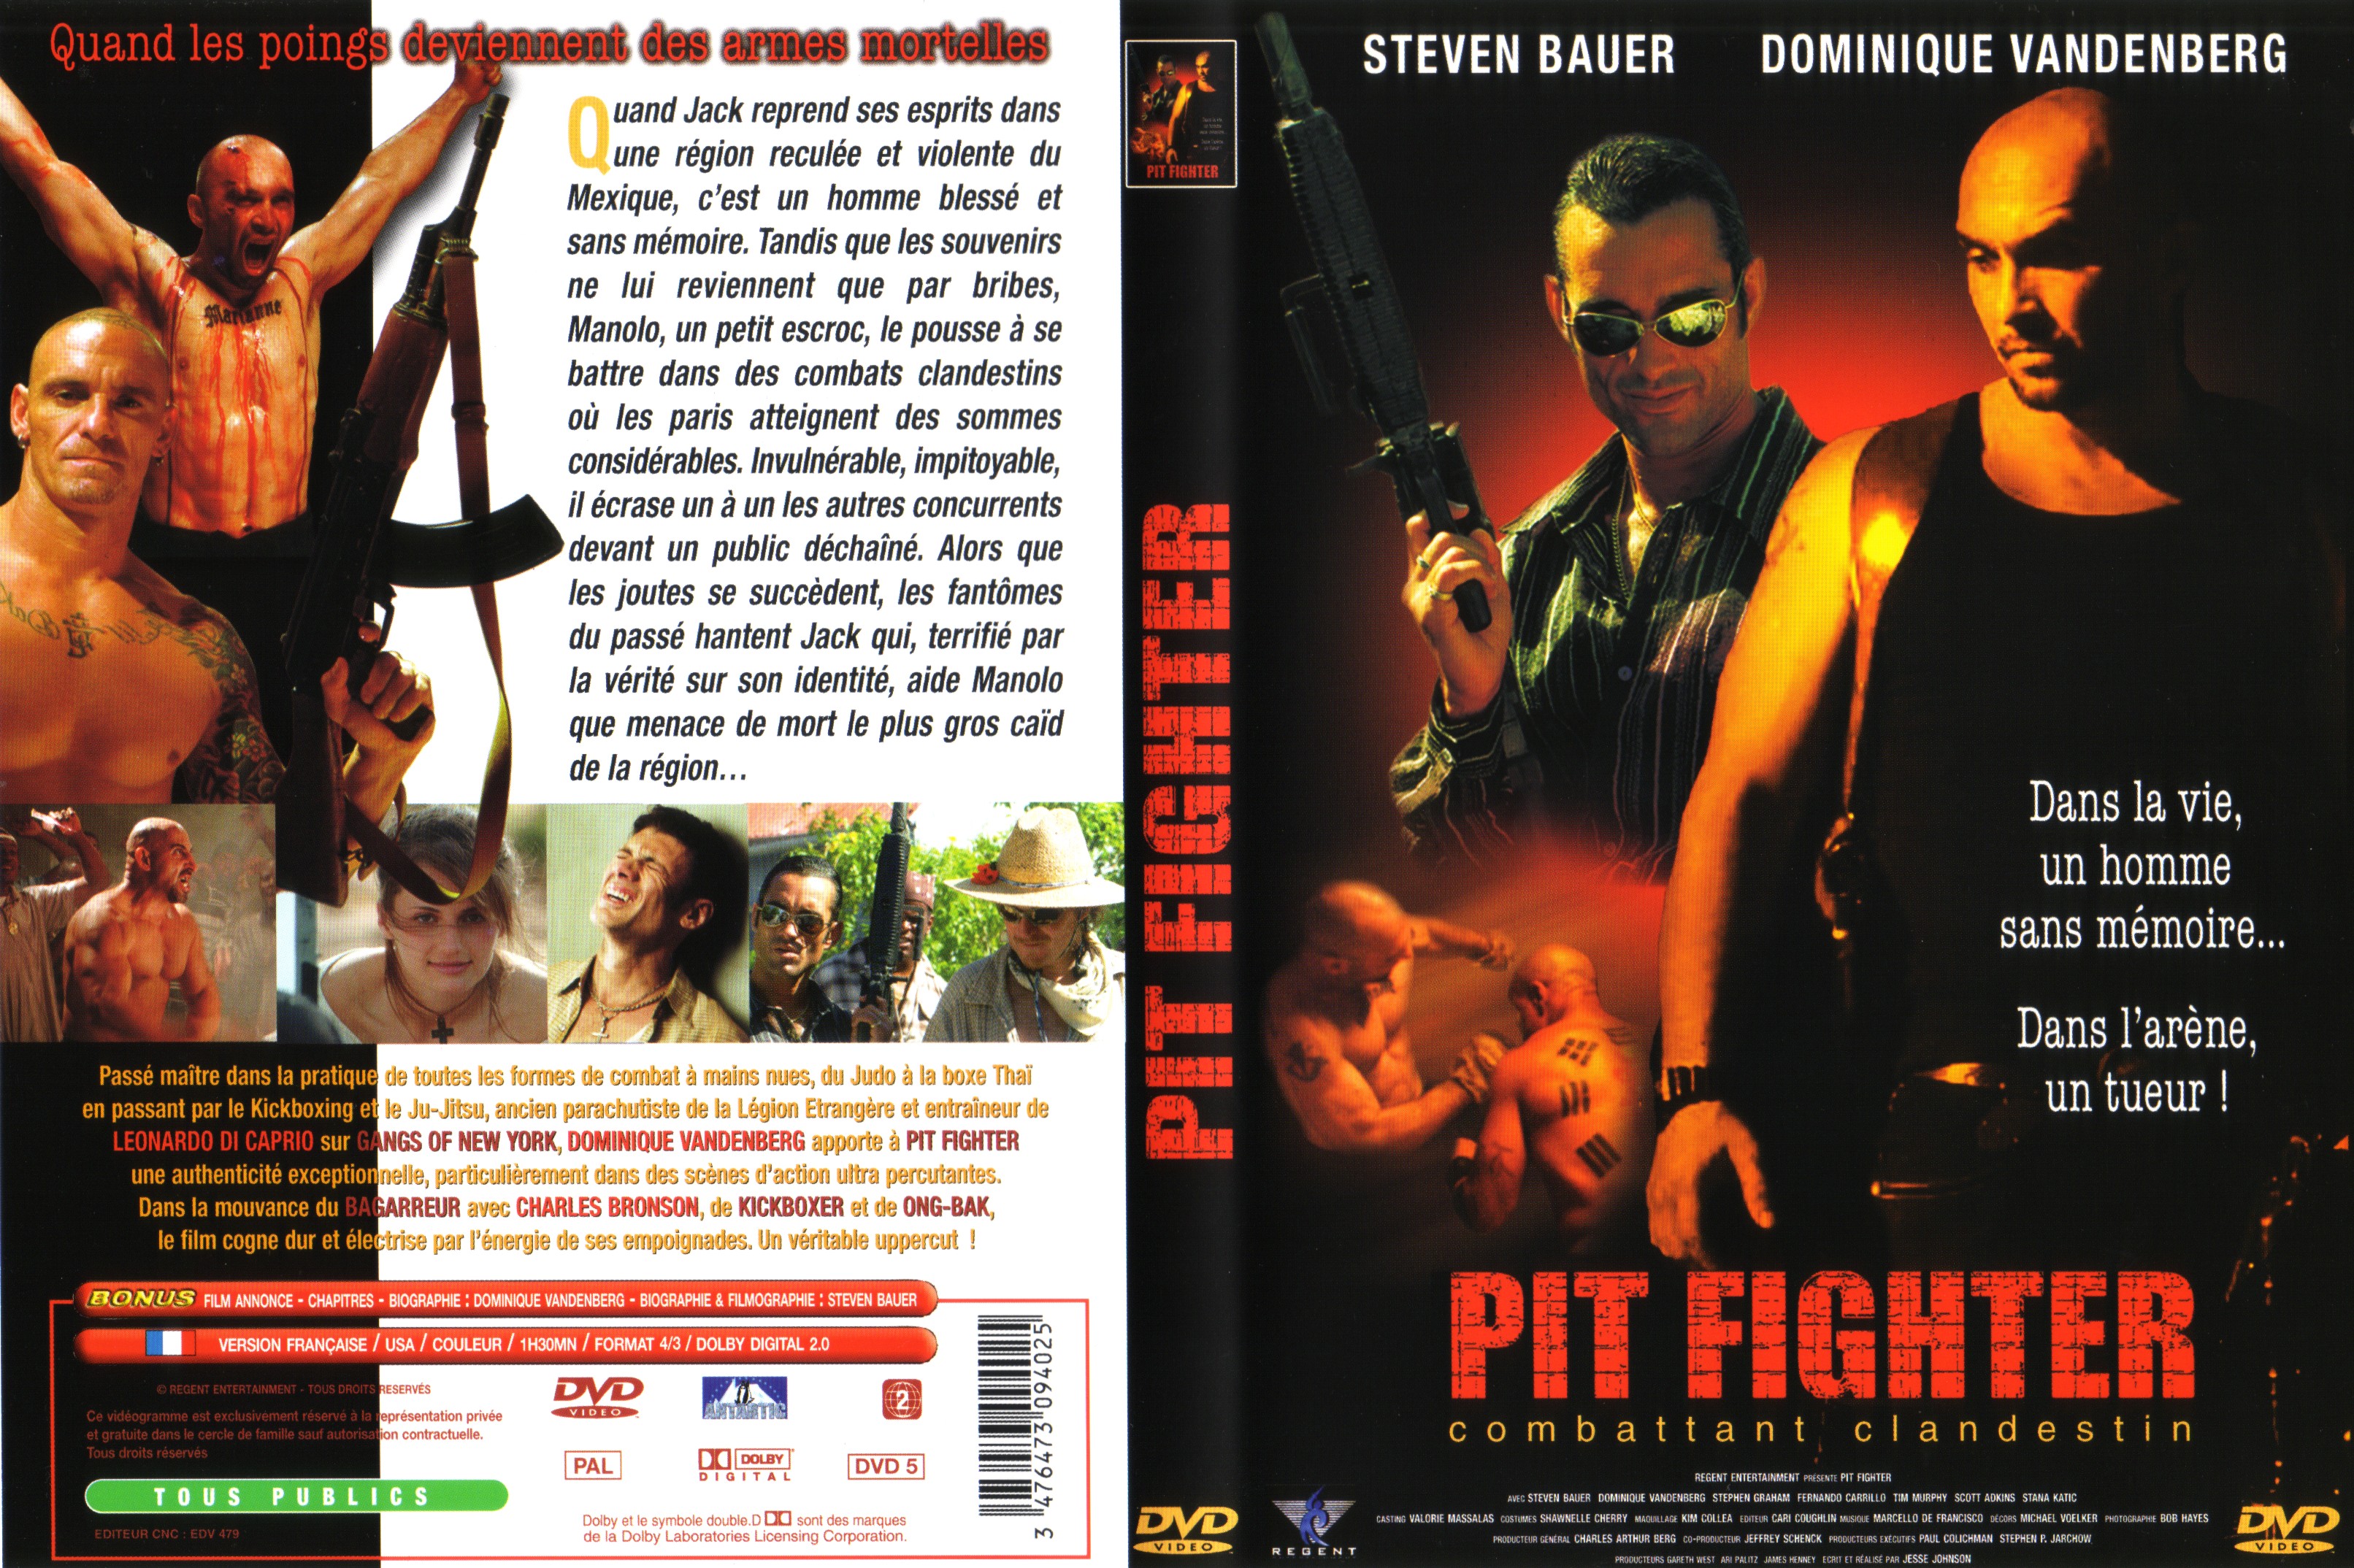 Jaquette DVD Pit fighter